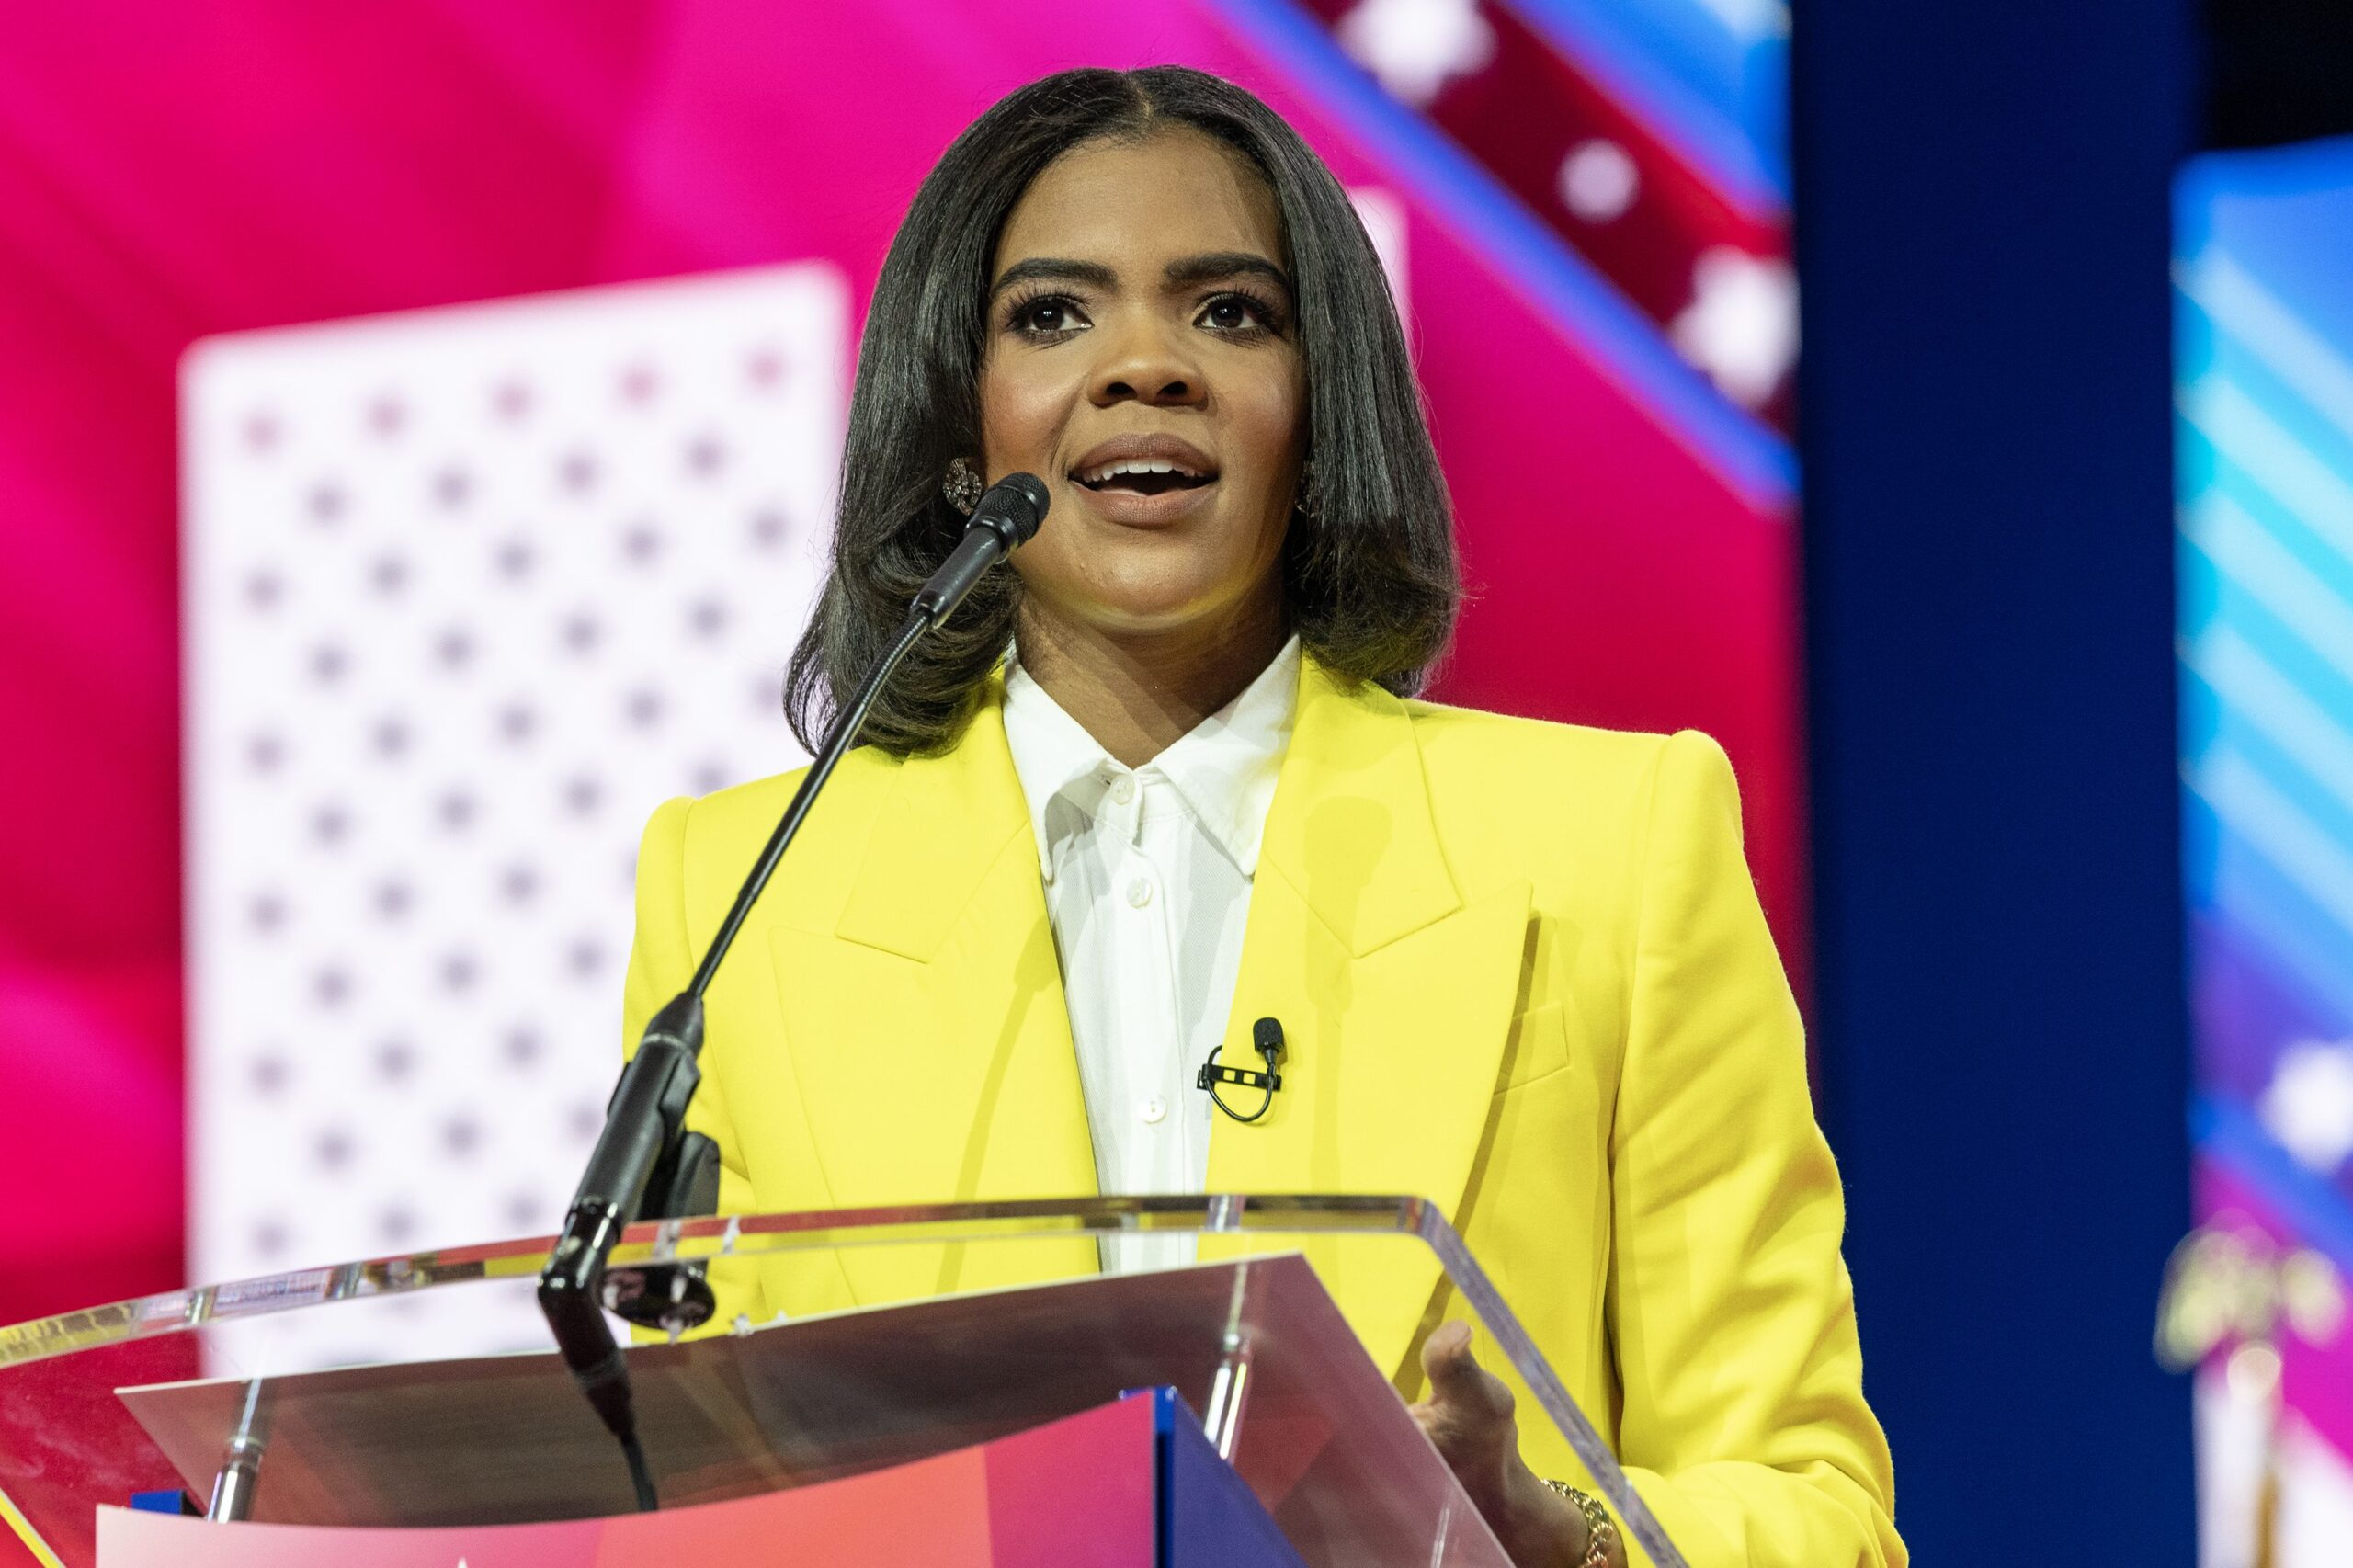 Ben Shapiro’s The Daily Wire severs ties with Candace Owens after her embrace of antisemitic rhetoric - Opinion and Analysis - News